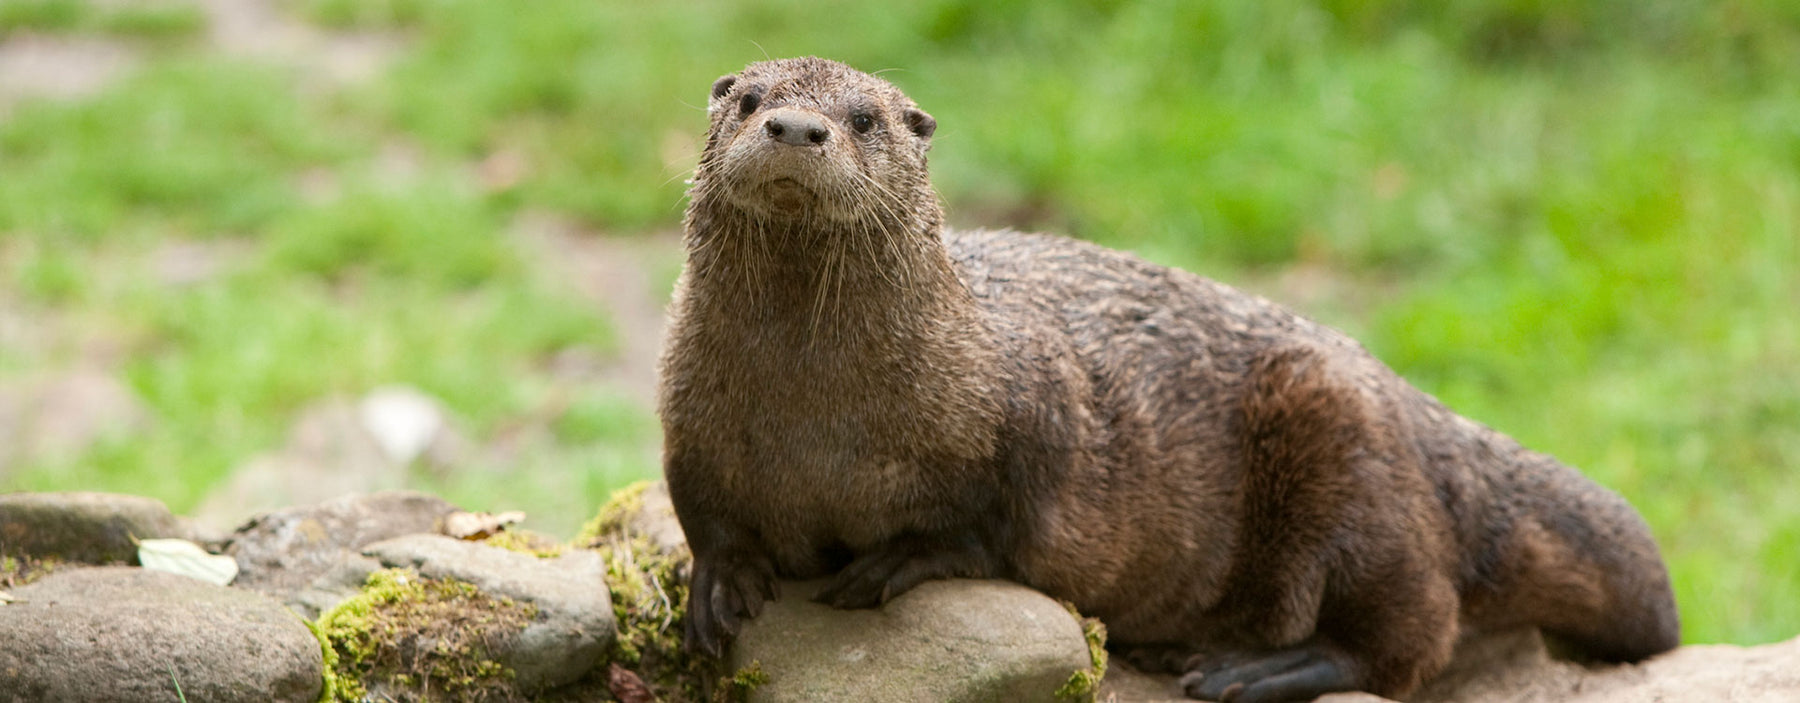 The North American River Otter